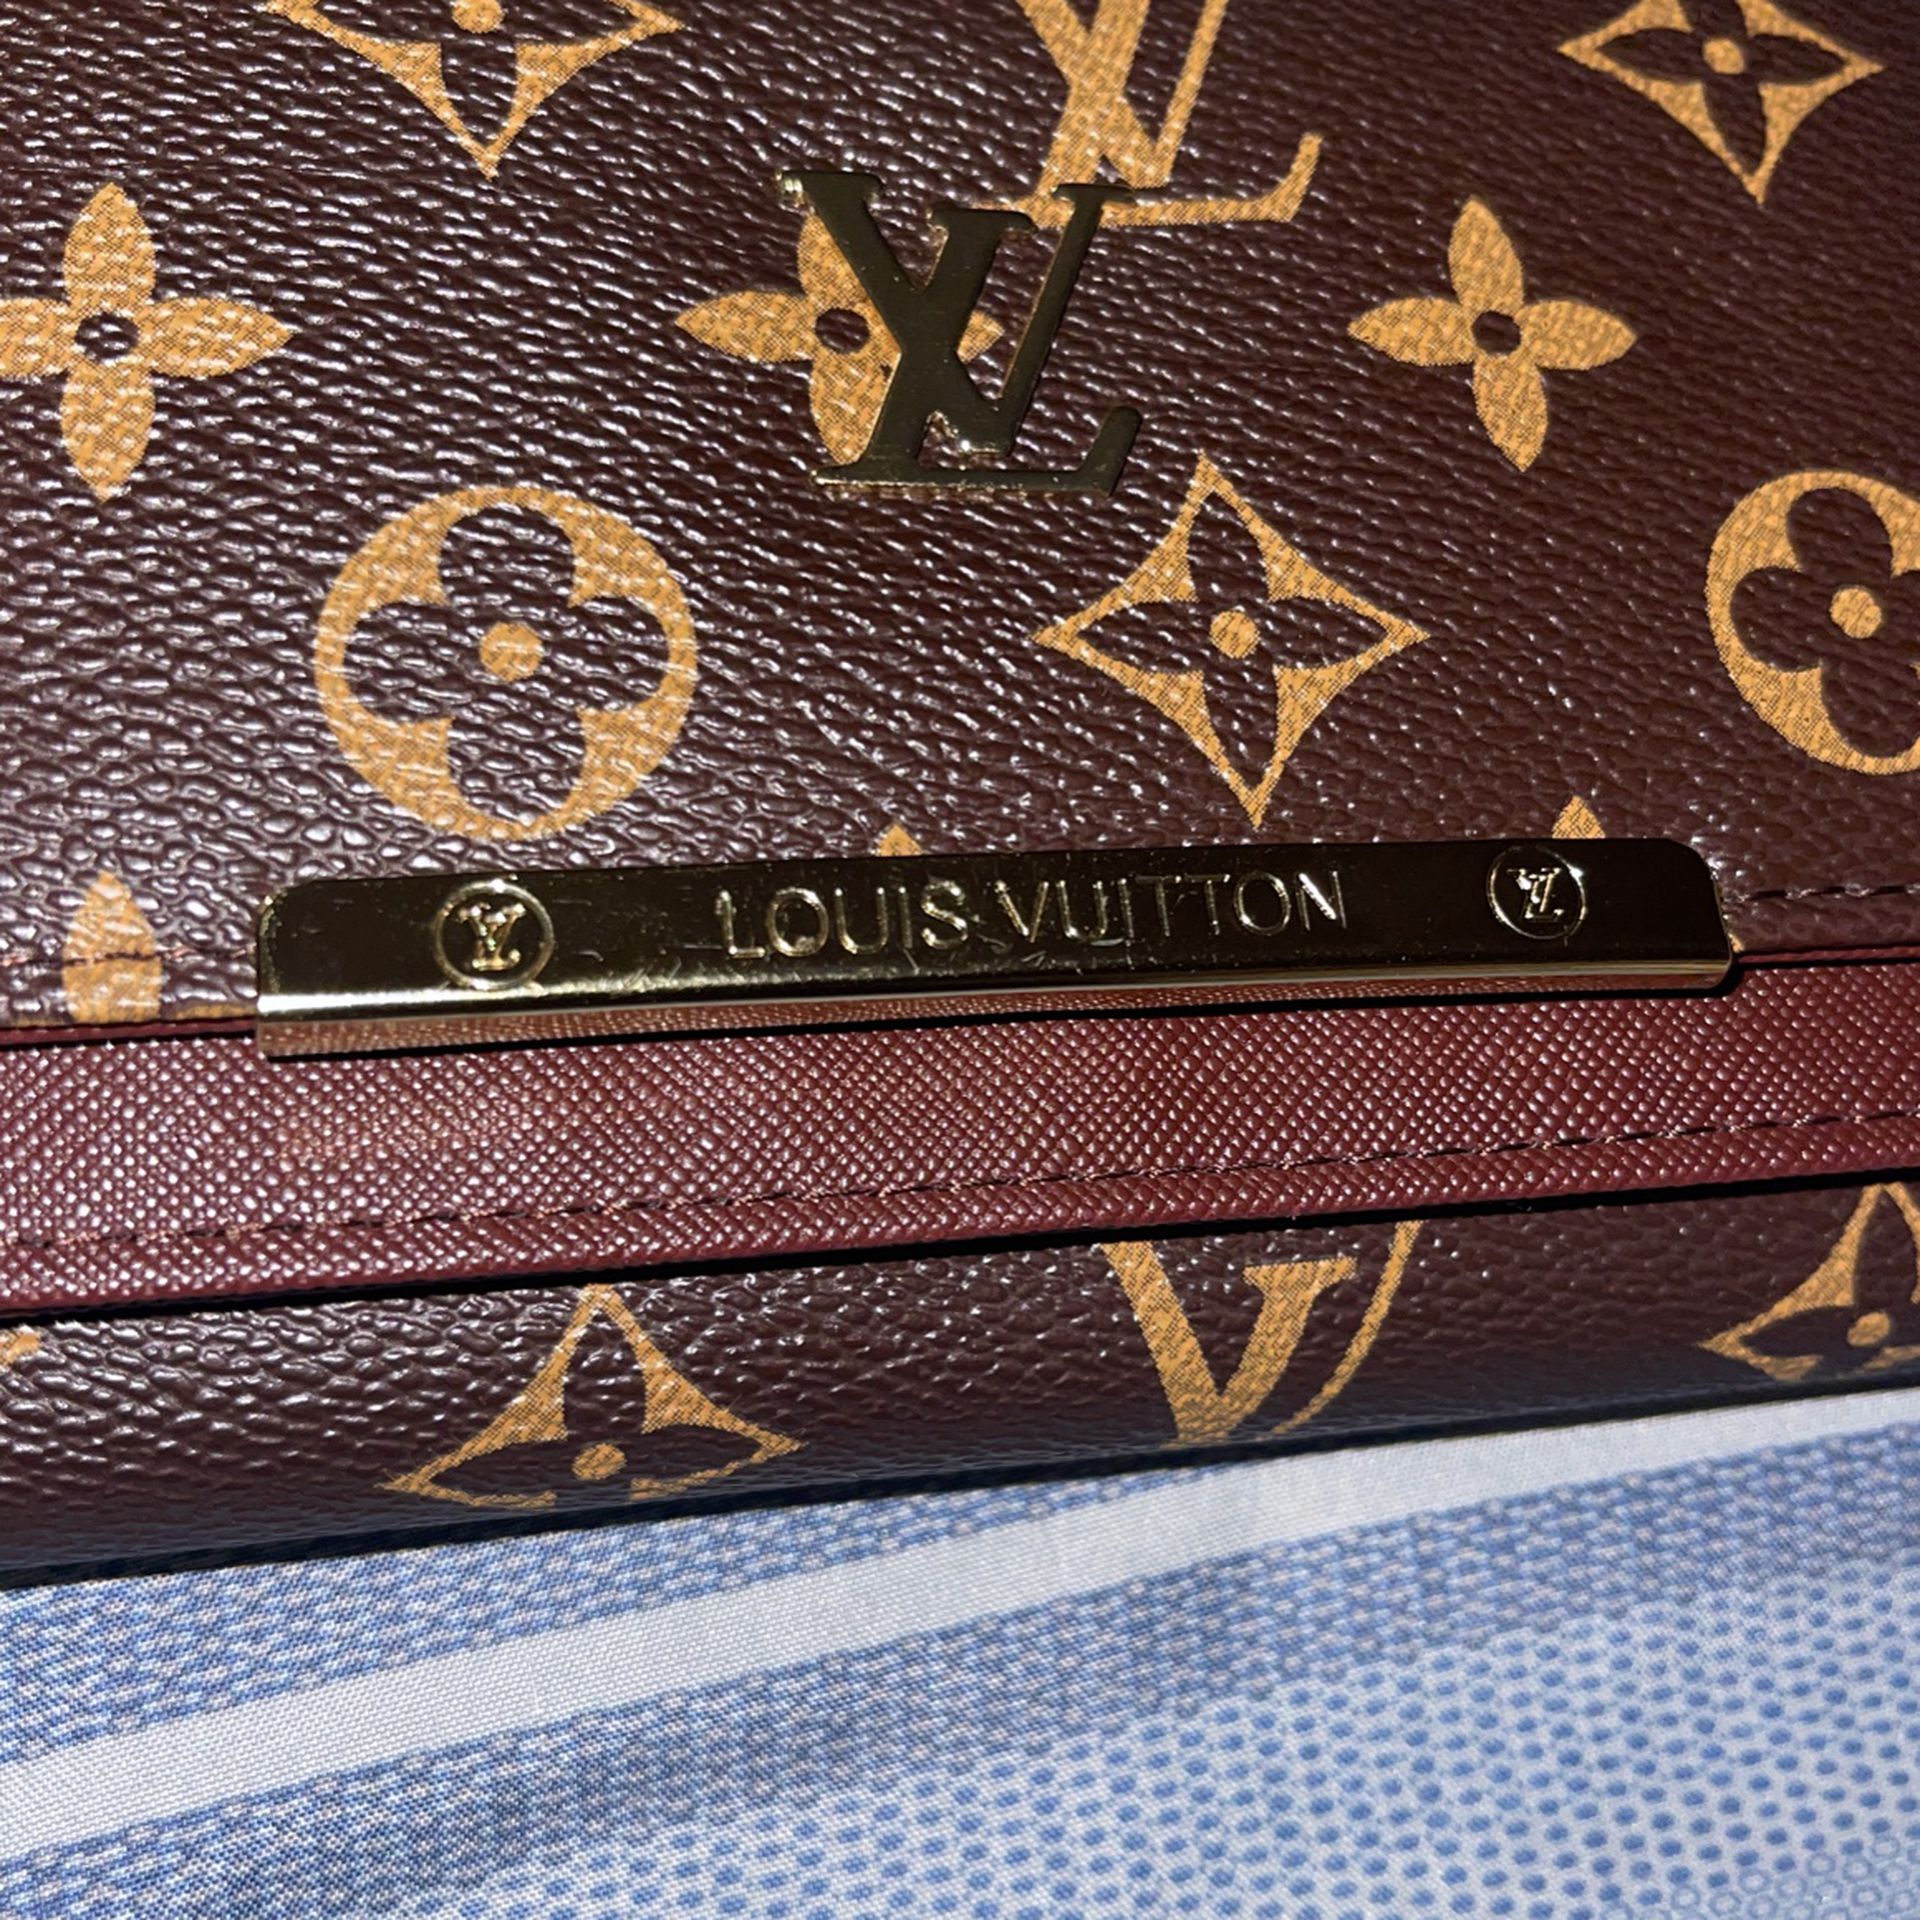 Vintage Louis Vuitton Coin Purse for Sale in Seaside, Oregon - OfferUp